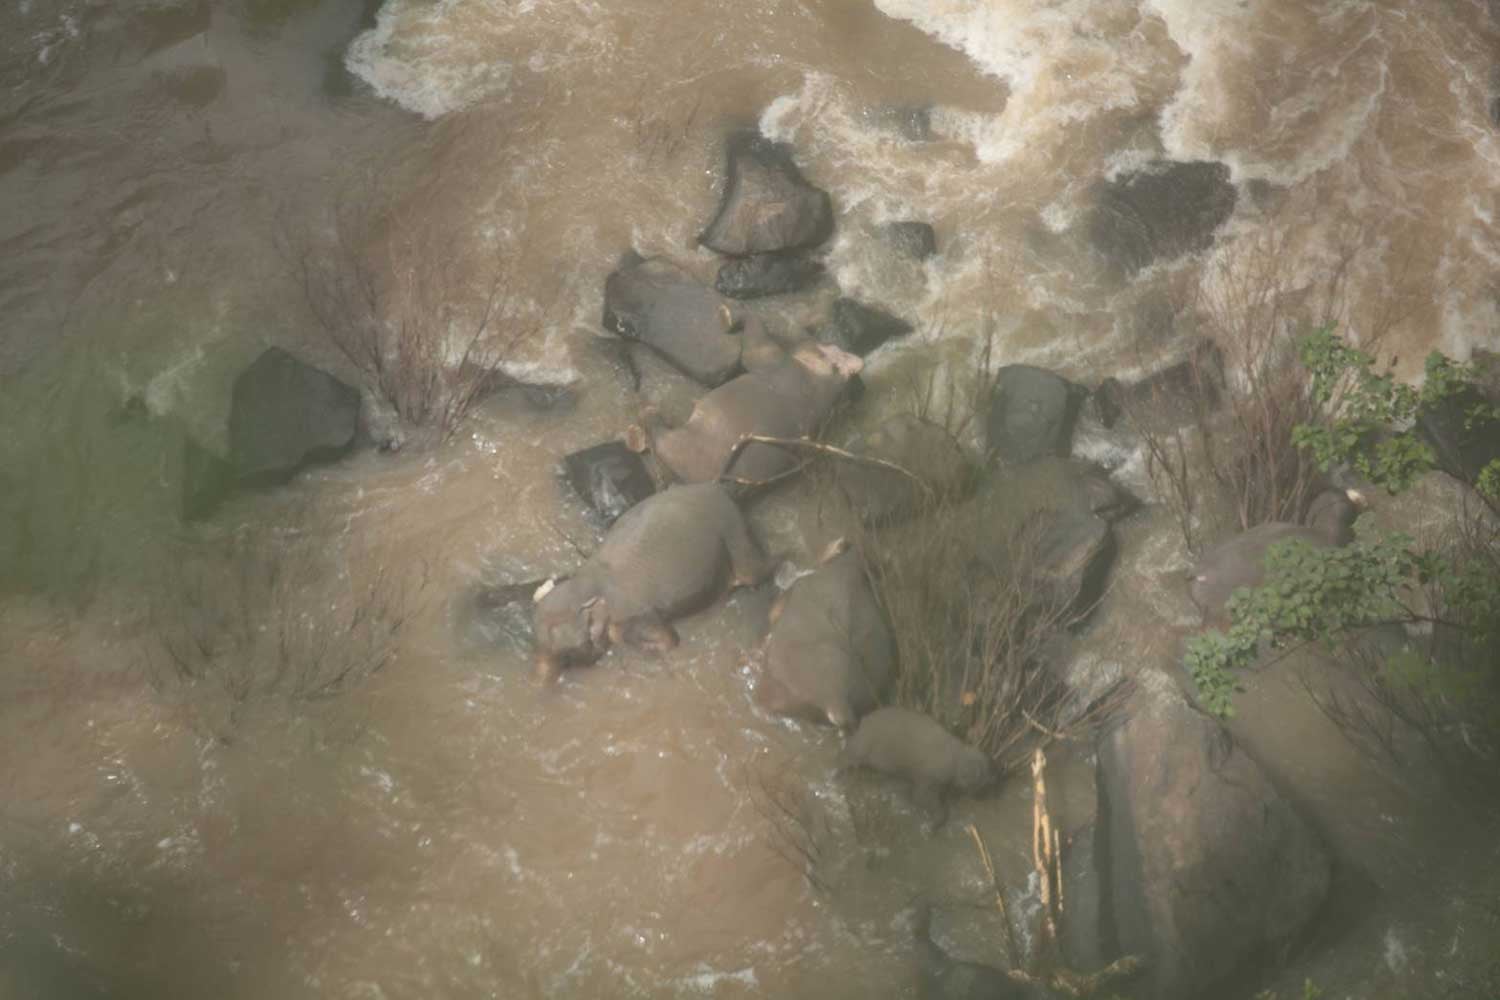 A WHOLE Family Of Elephants Tried To Save Their Baby Who Slipped On A Waterfall, They All DIE - WORLD OF BUZZ 1